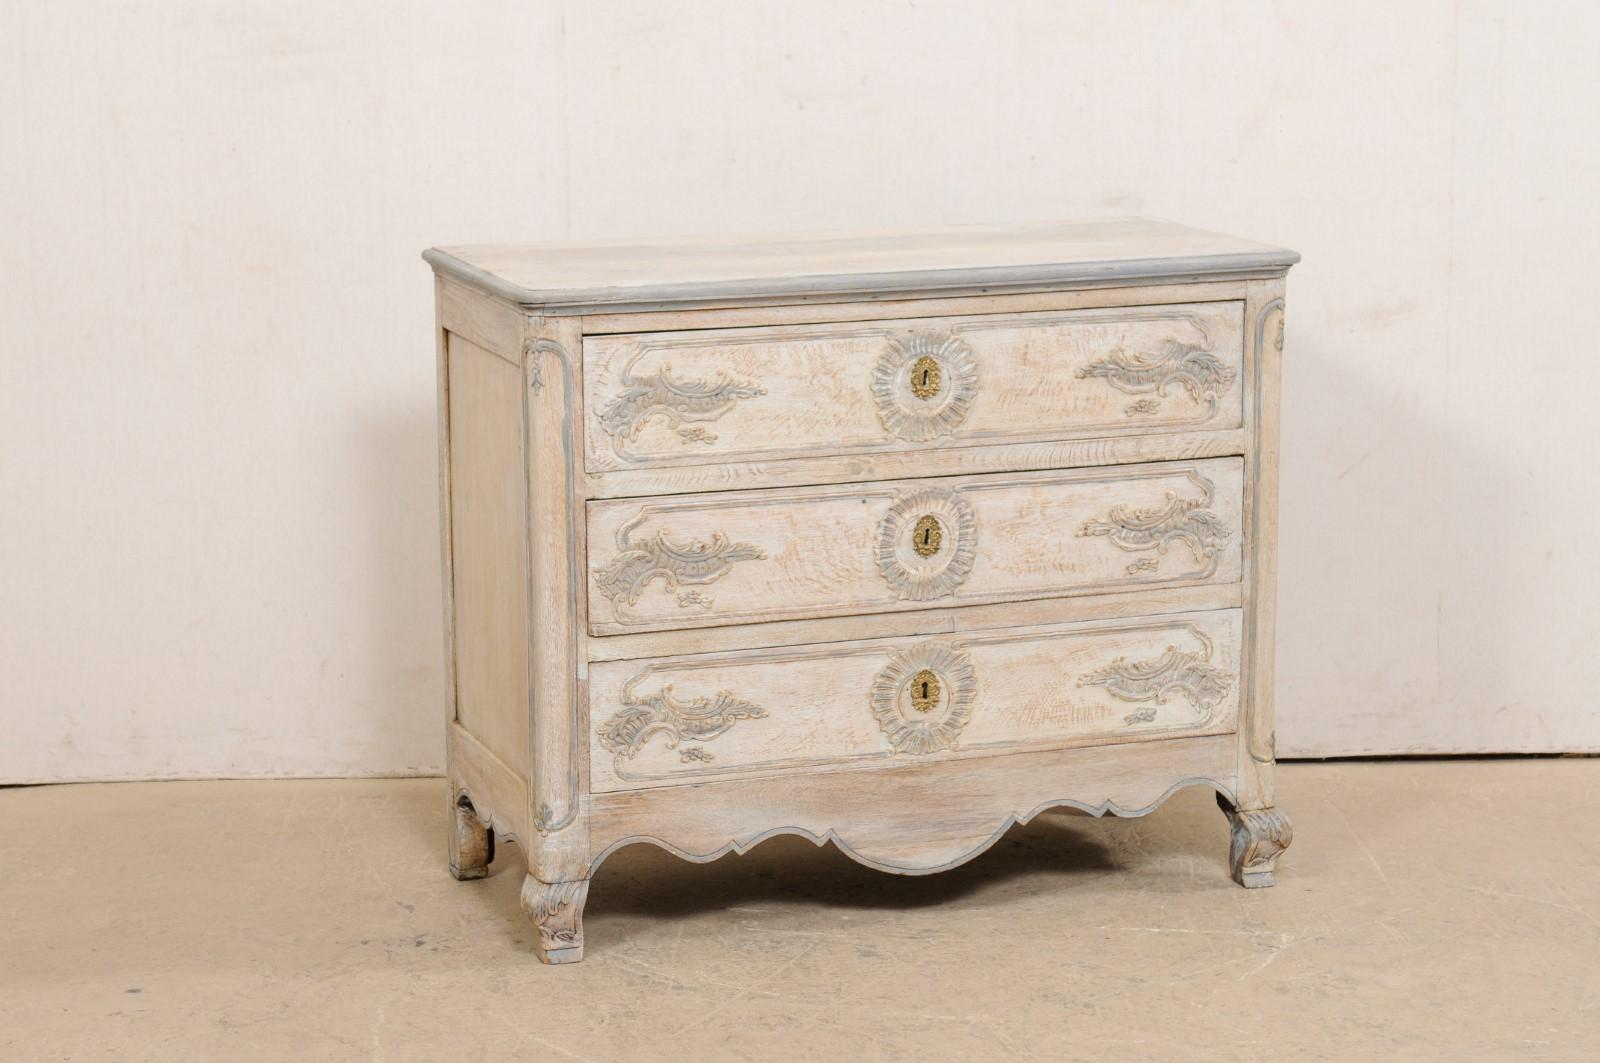 A French Louis XV style carved and painted chest from the late 19th century. This antique commode from France features three dove-tailed and graduated drawers, which have been carved in the decorative vocabulary typical of the Louis XV style,